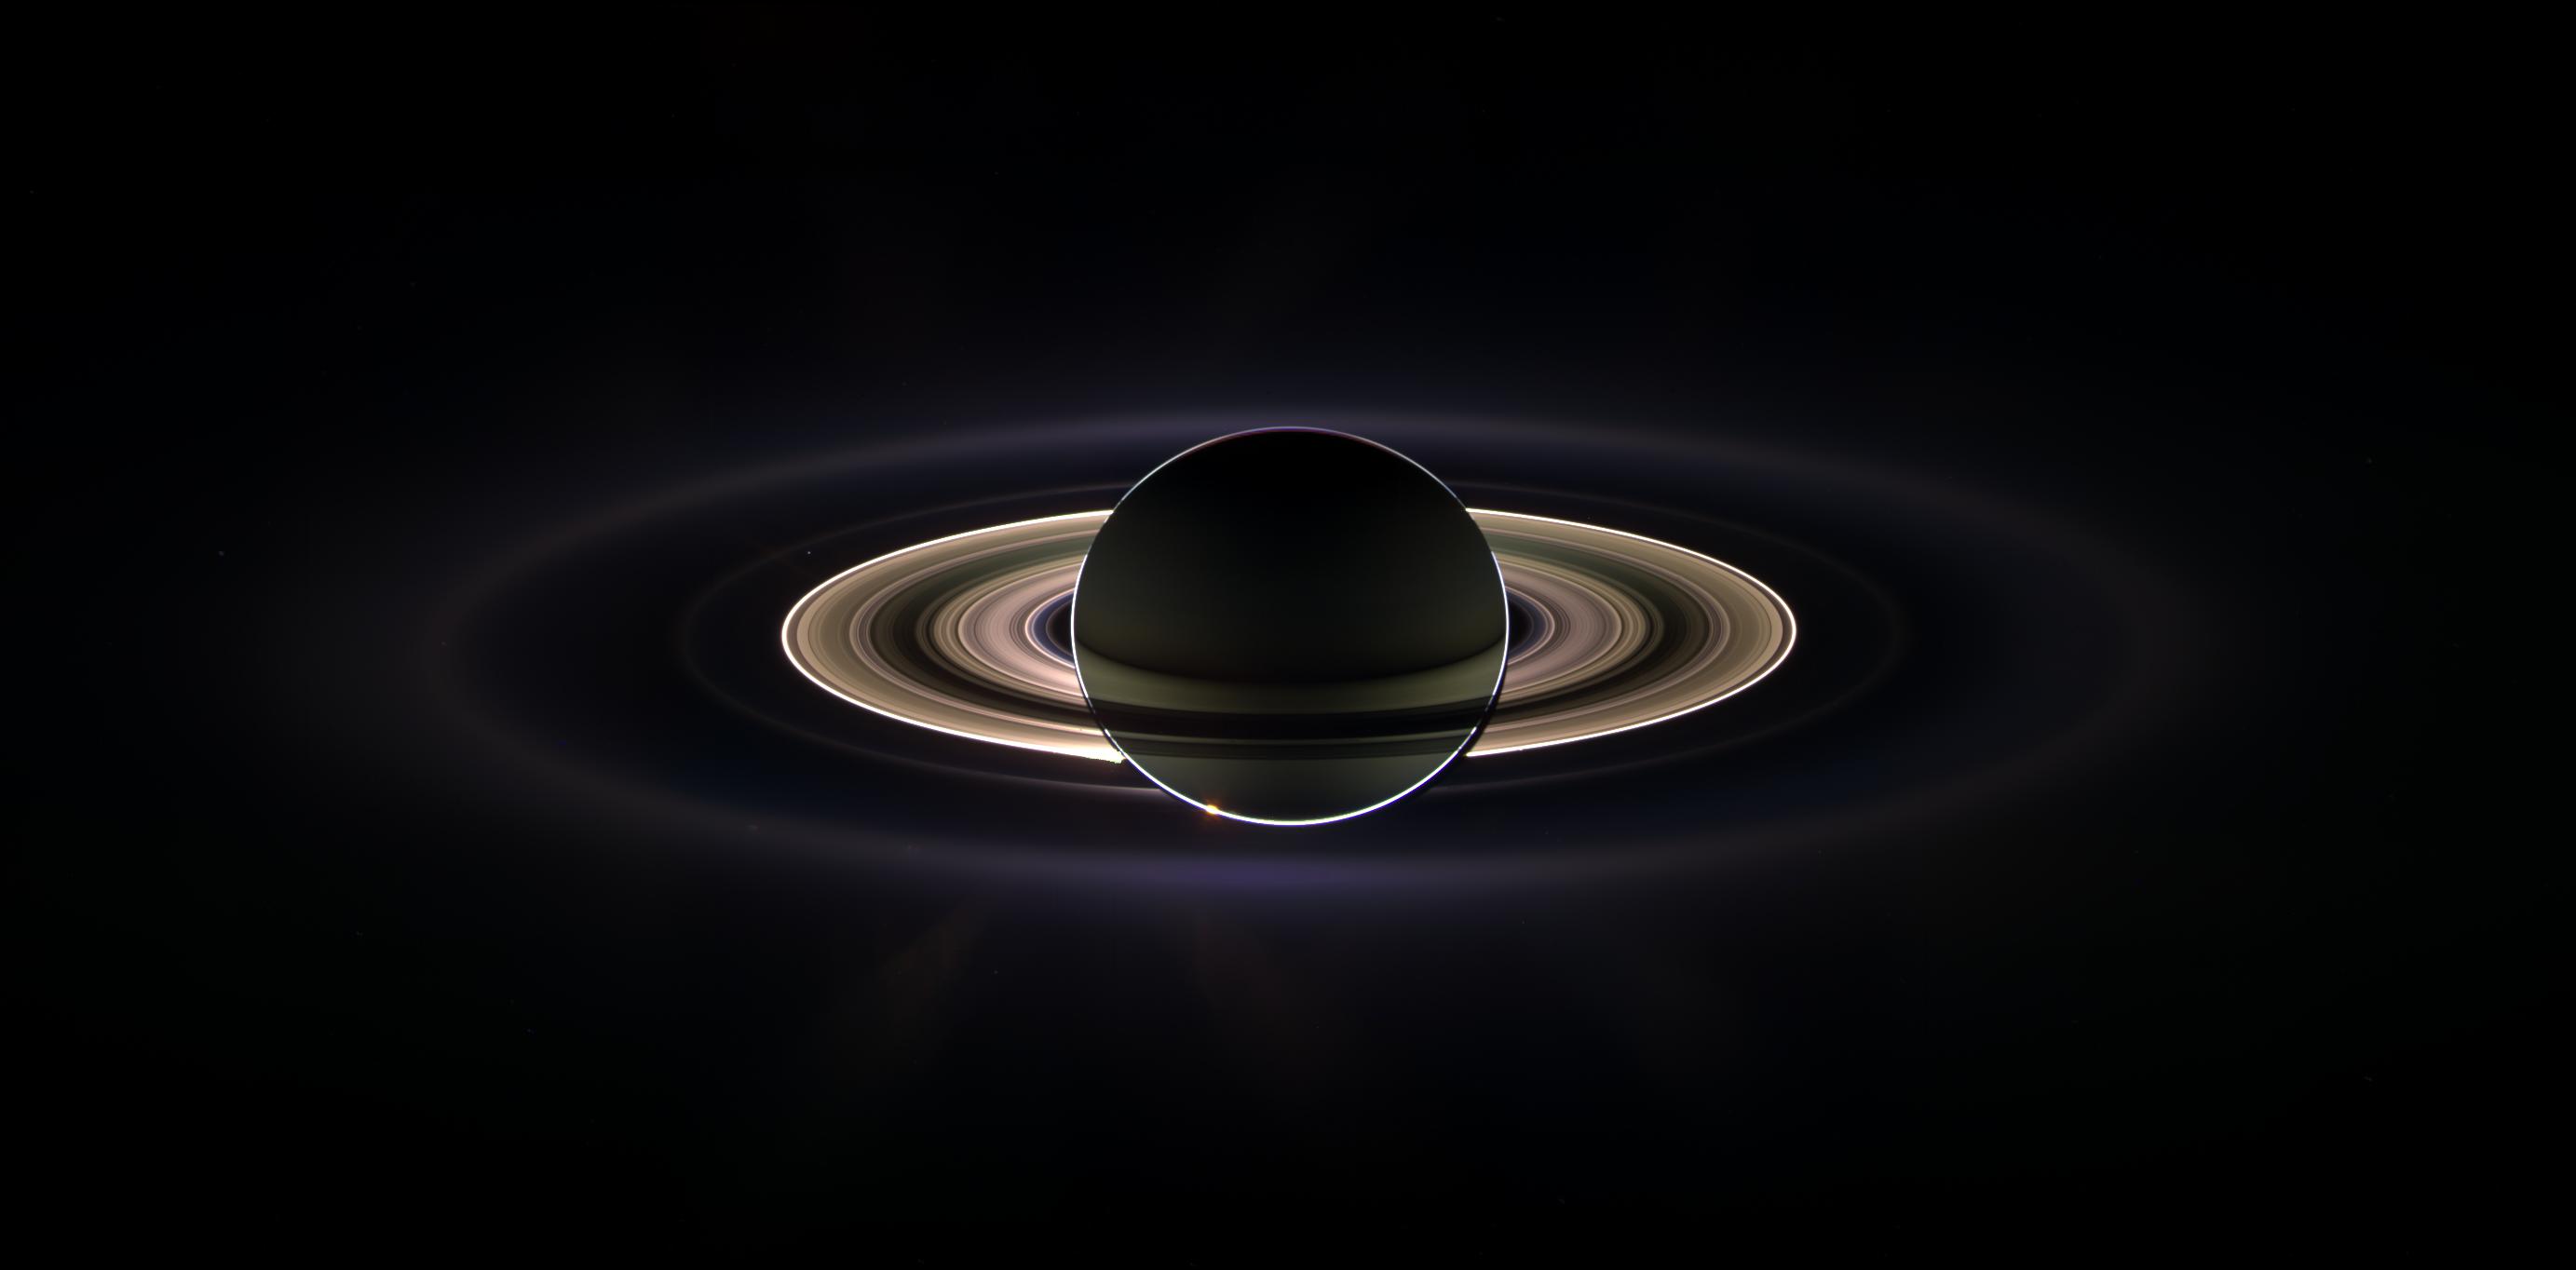 Saturn and its glorious rings appear to glow in this image taken when the giant planet was backlit by the Sun.